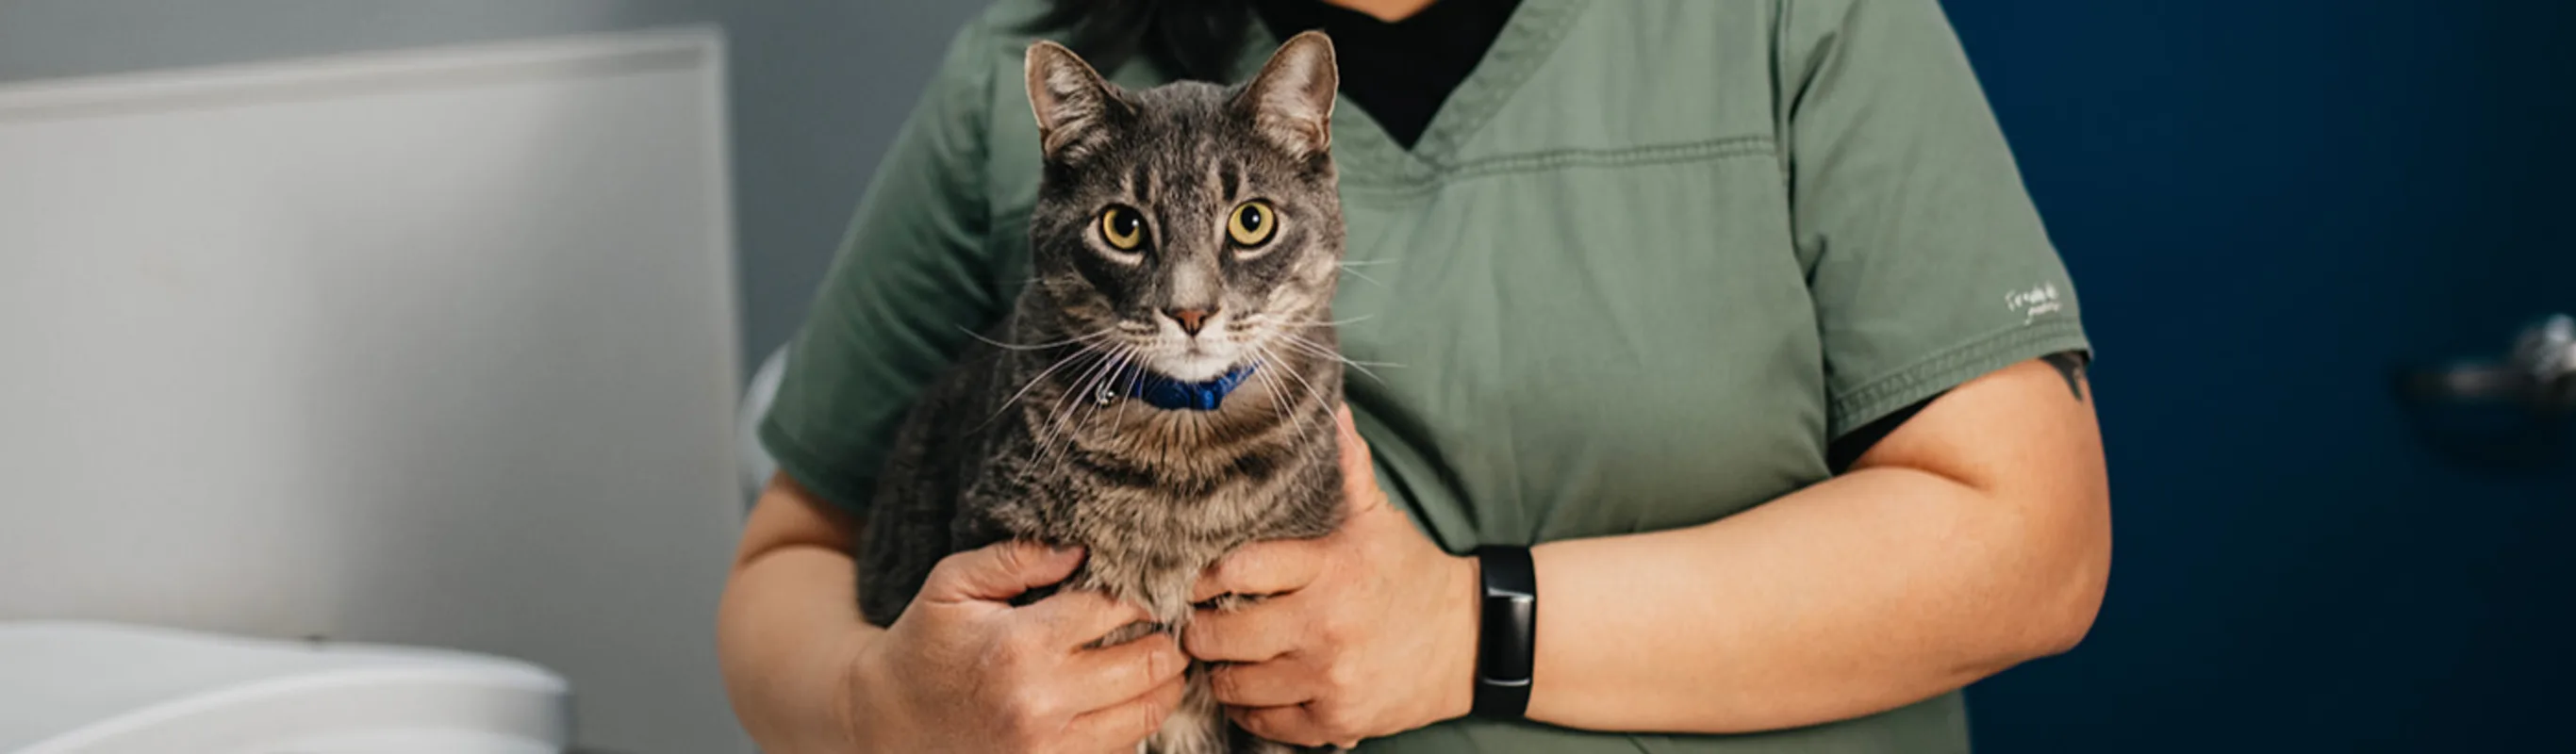 Staff member dressed in green holding a gray brindle cat with a blue collar and yellow eyes